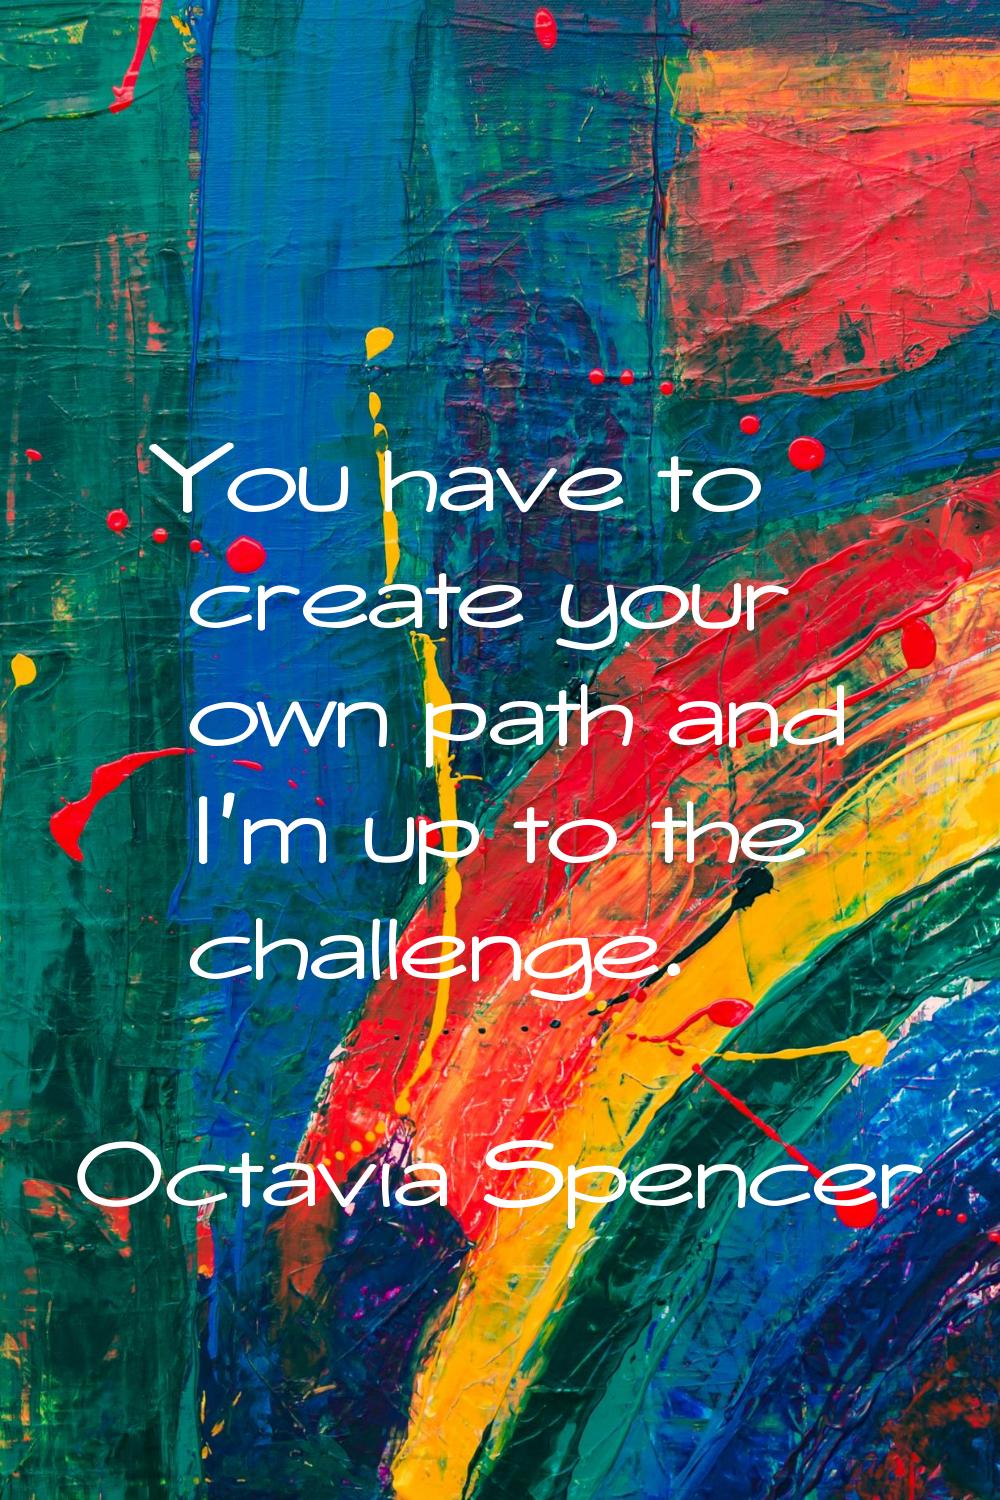 You have to create your own path and I'm up to the challenge.